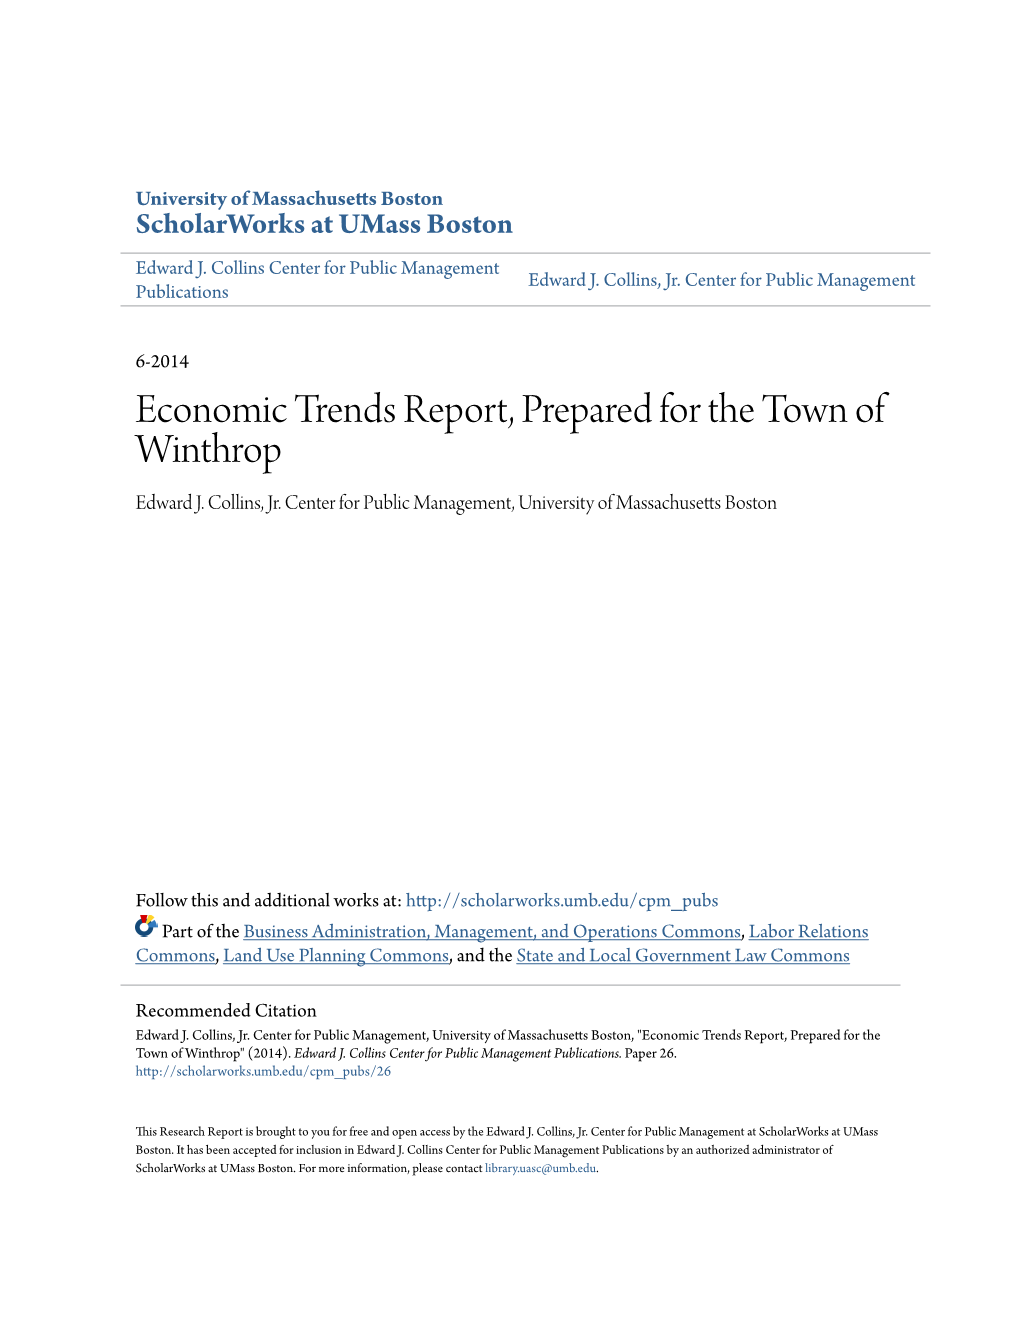 Economic Trends Report, Prepared for the Town of Winthrop Edward J